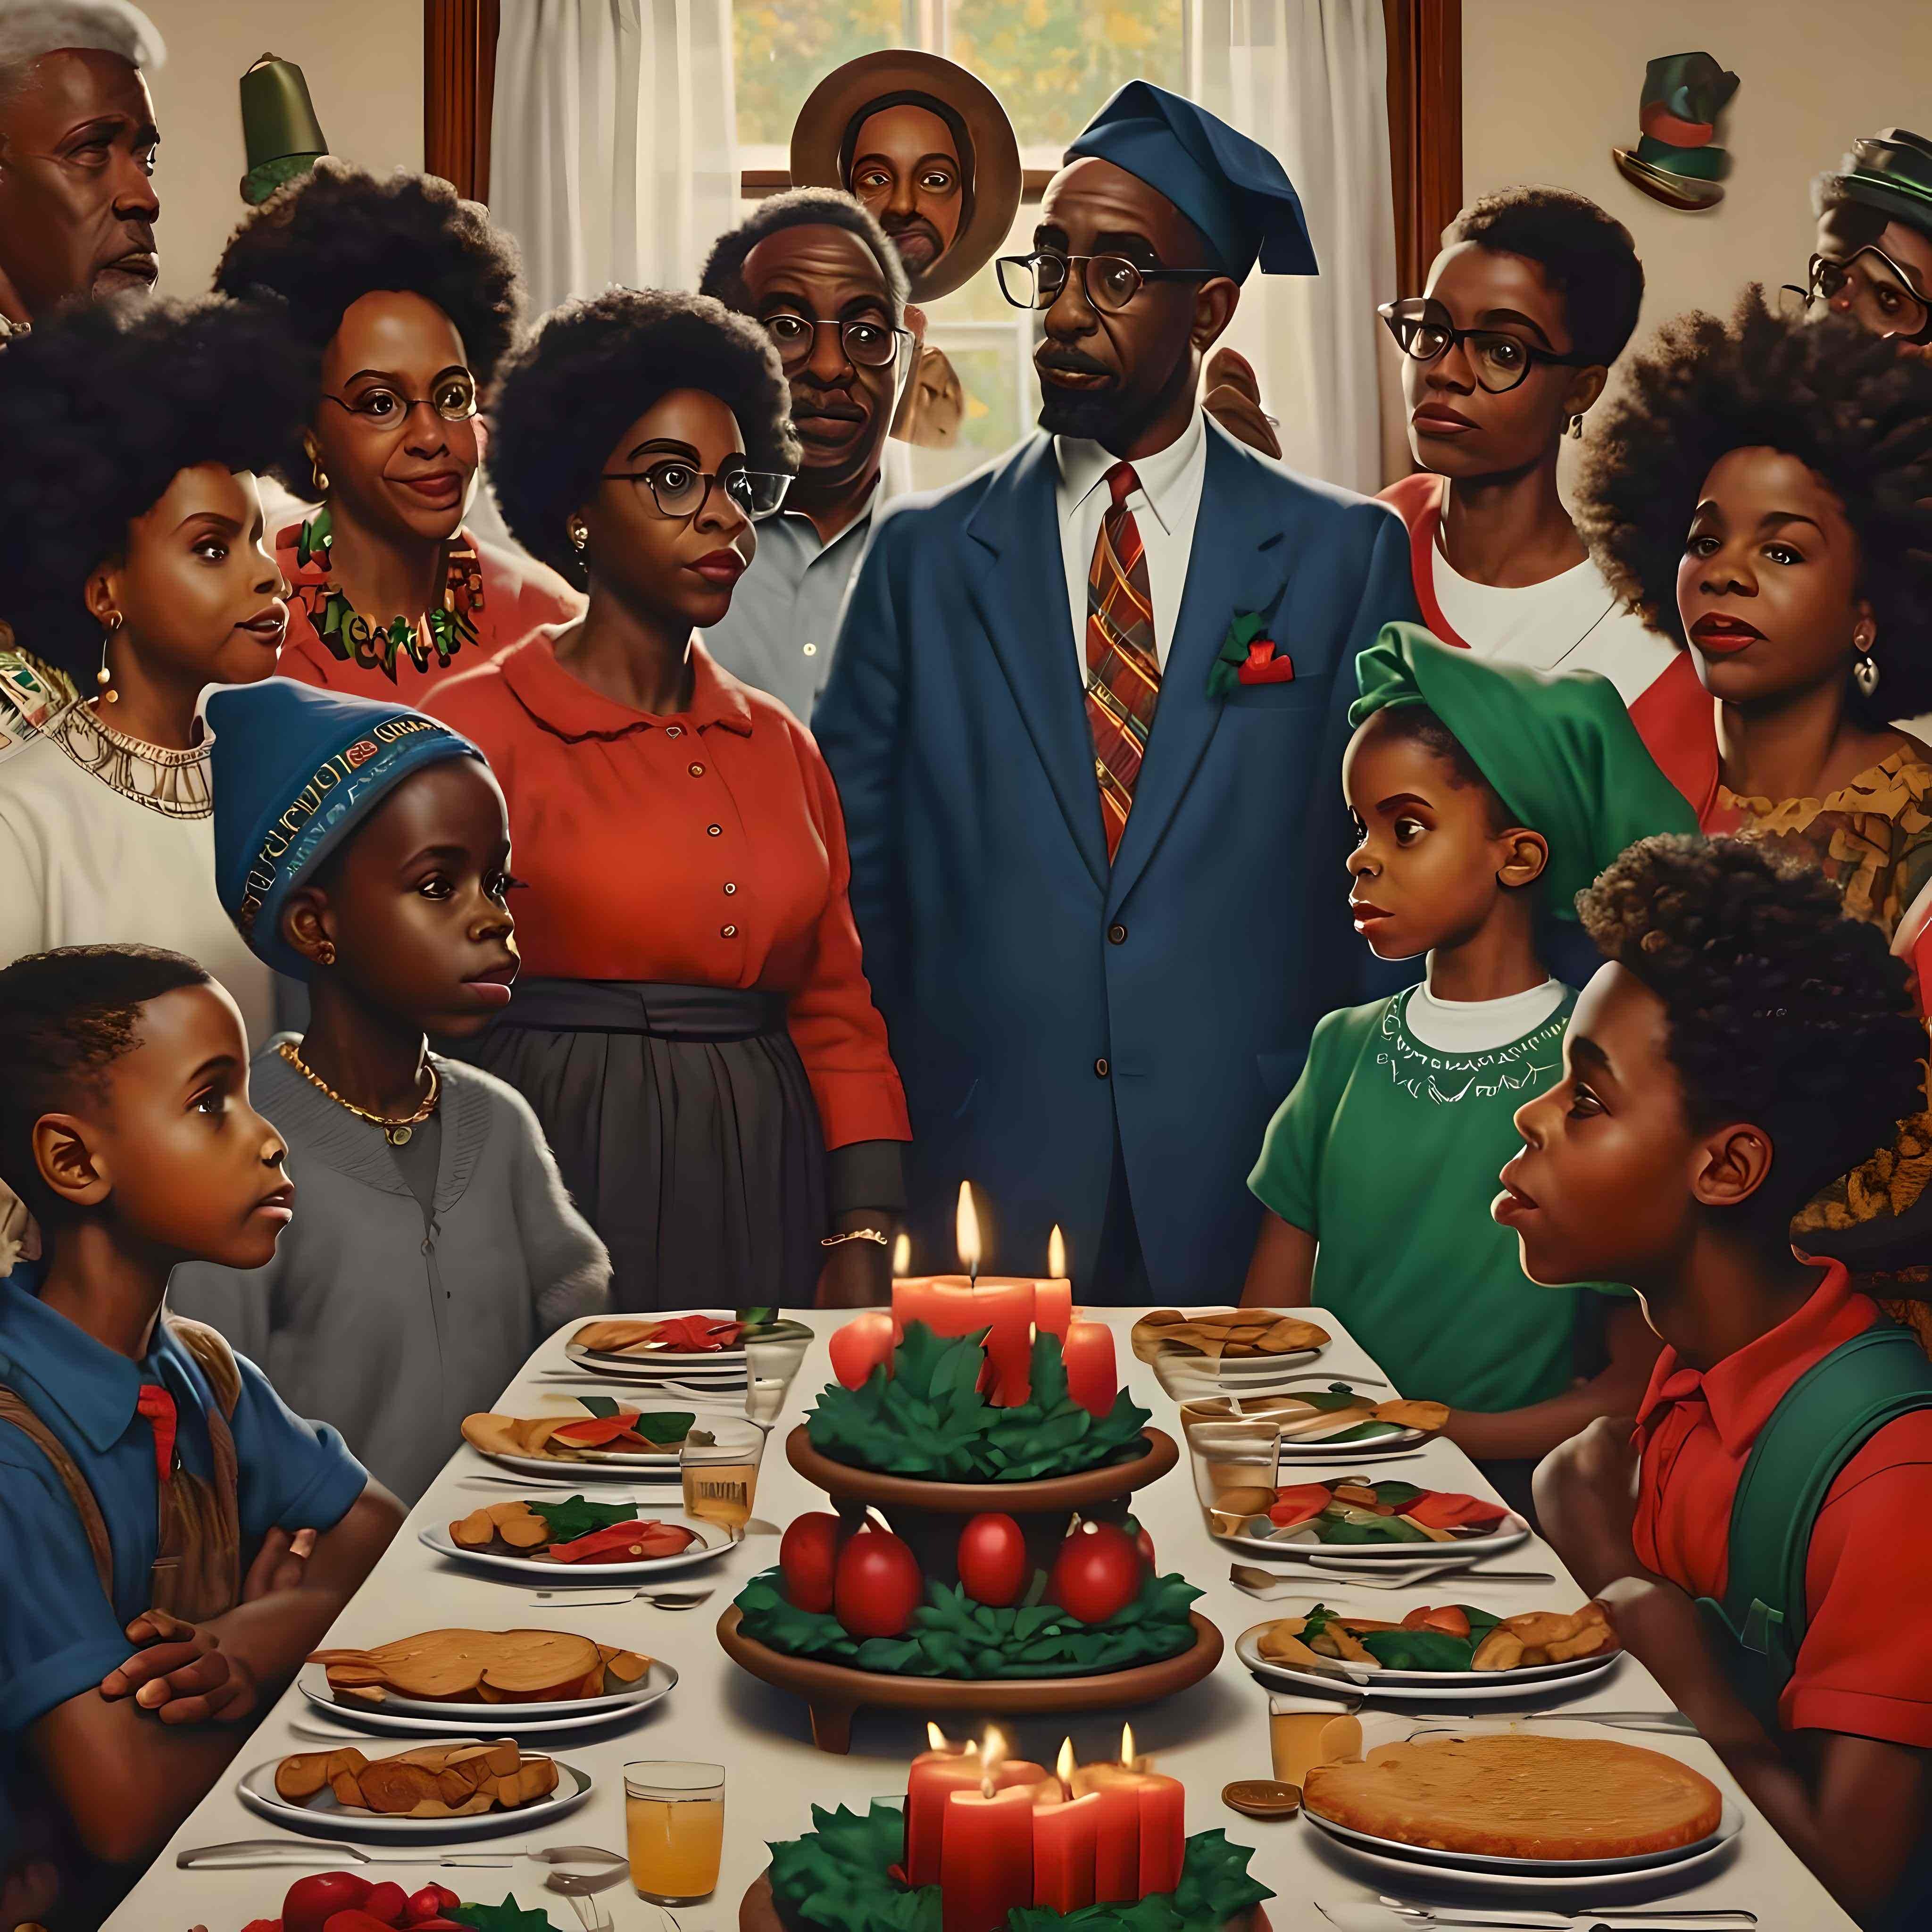 Crazy Kwanzaa in the style of Norman Rockwell